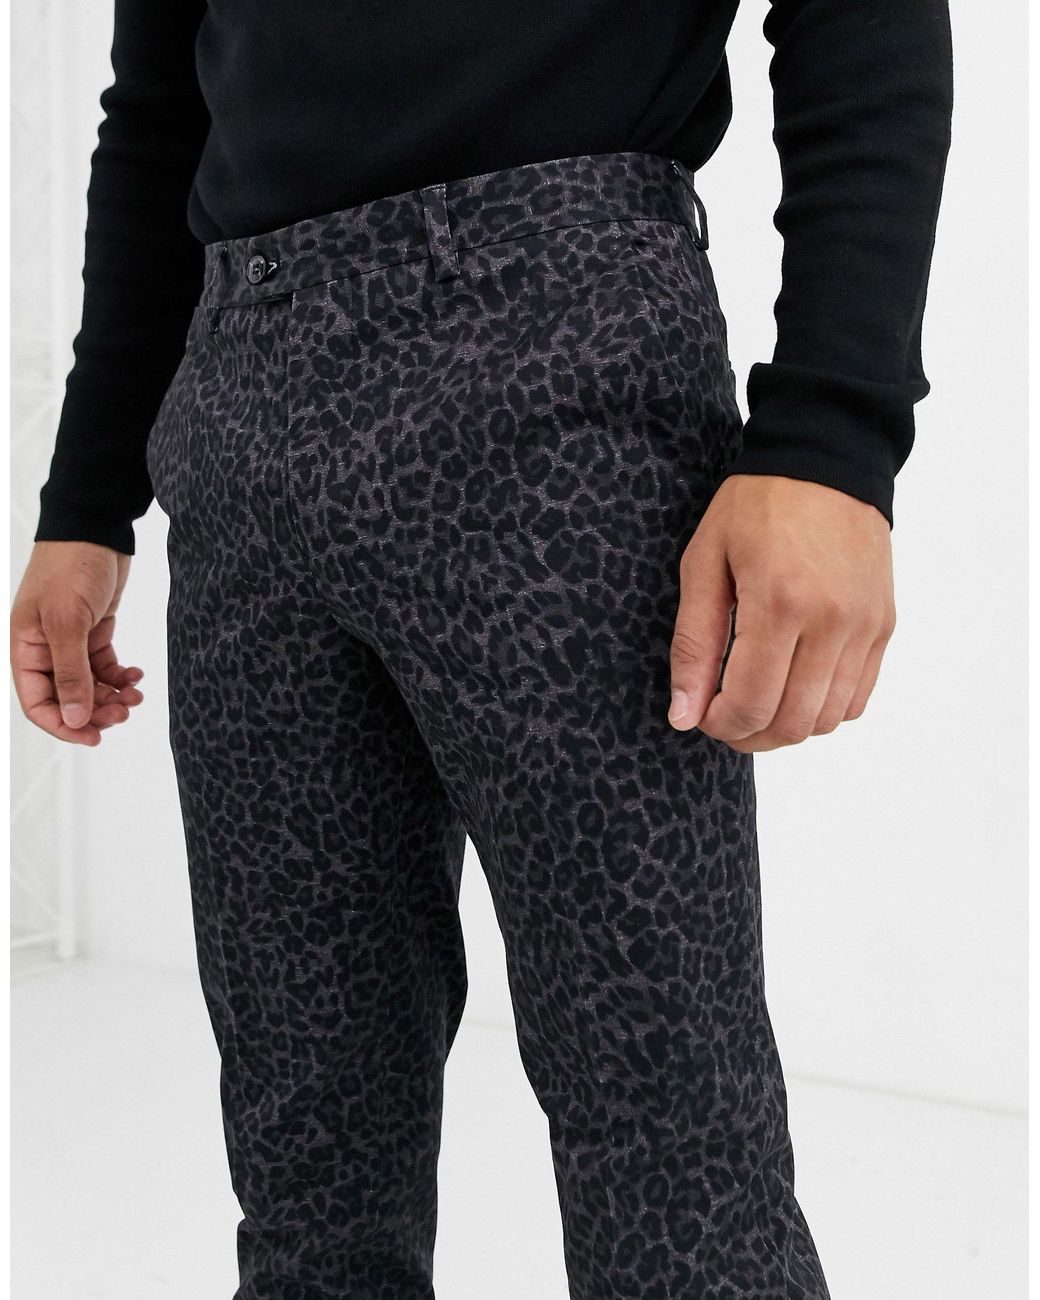 Leopard Print Pants | Basic State Style Traders